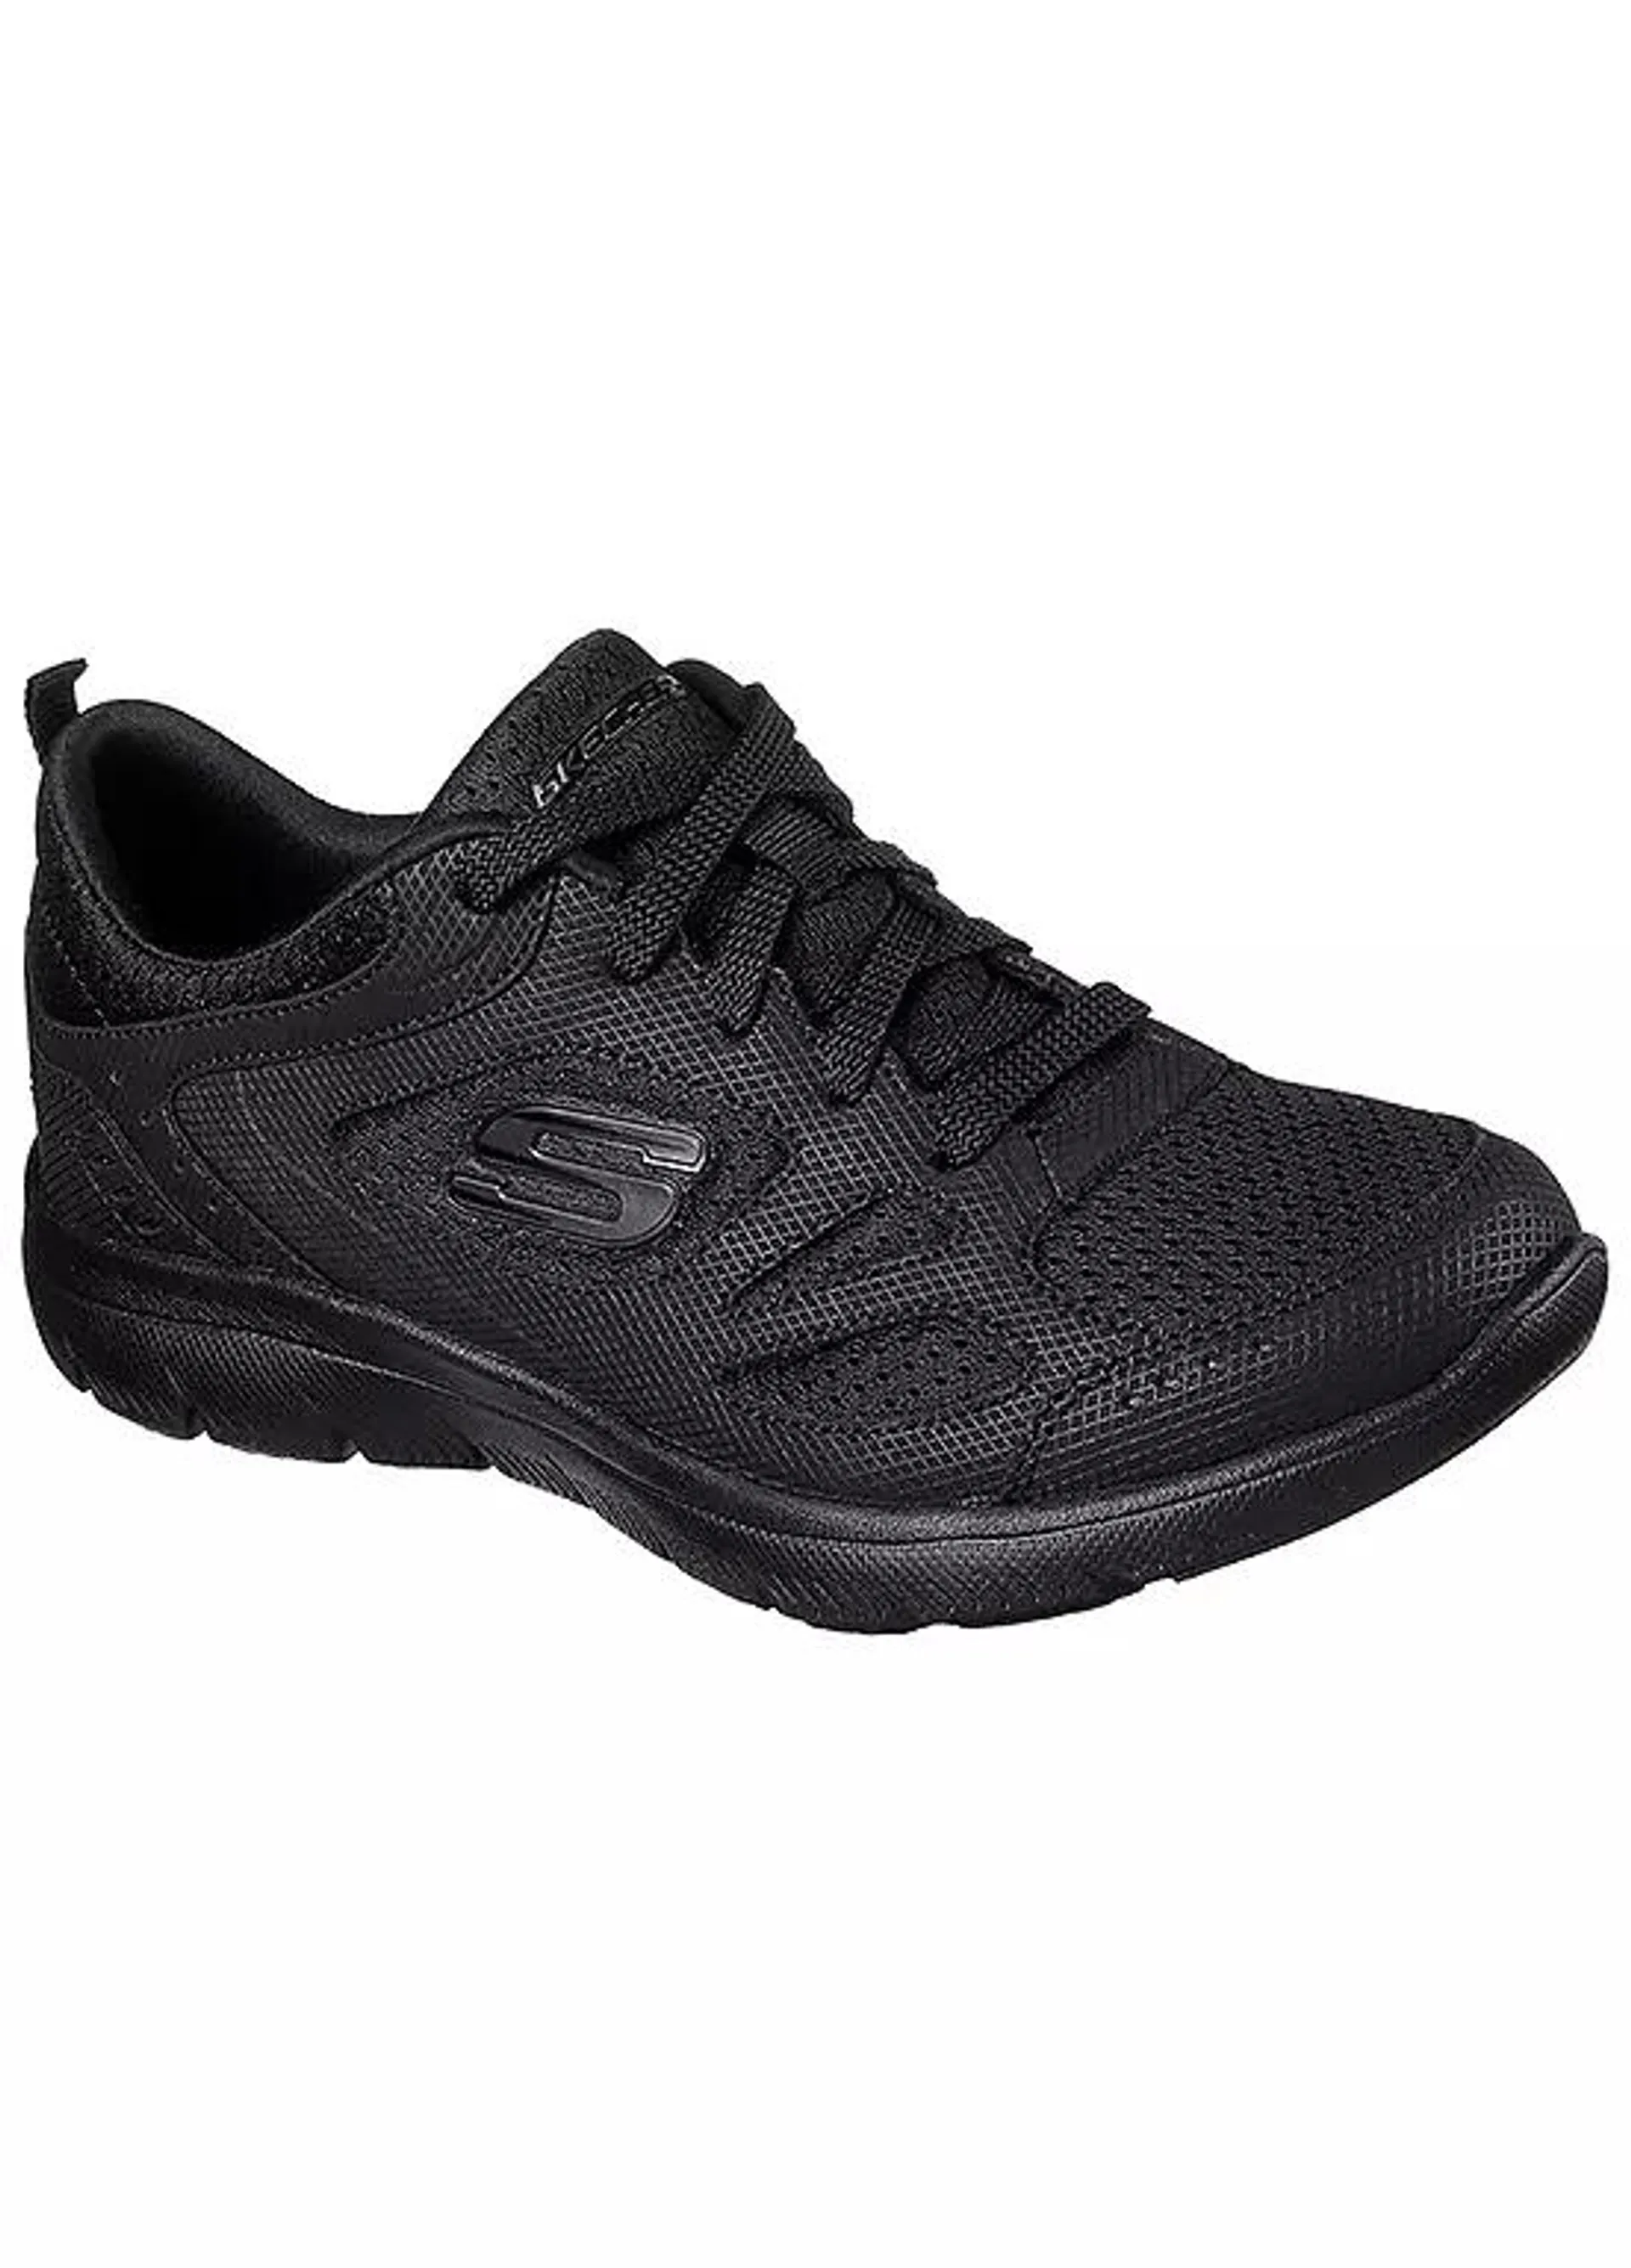 Skechers Summit Suited Trainers